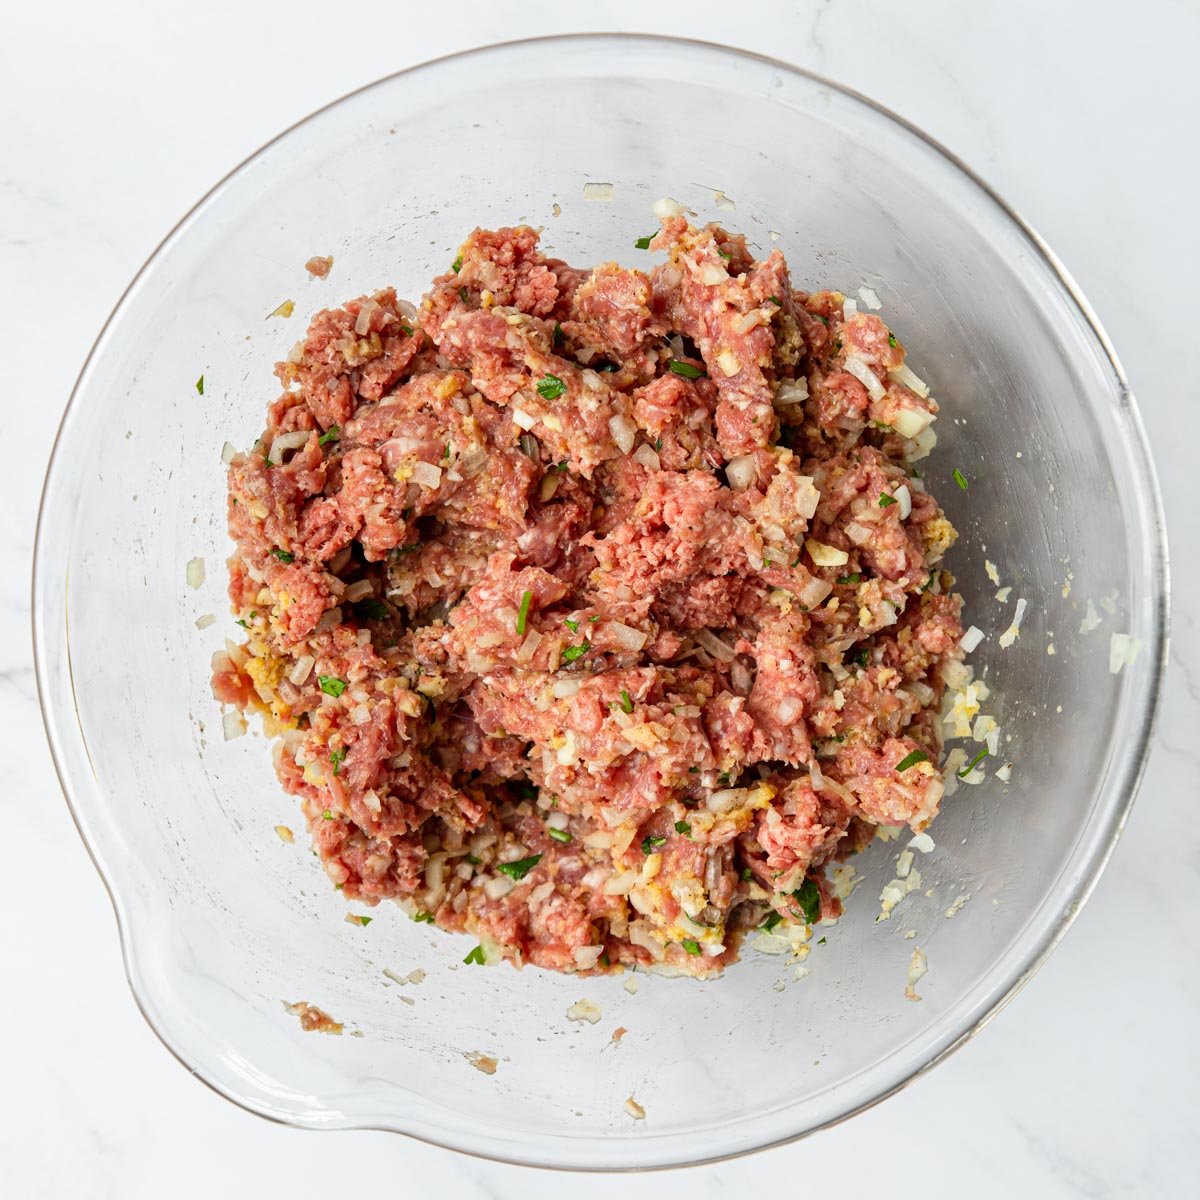 ground beef, ground pork, panade and herbs in a bowl